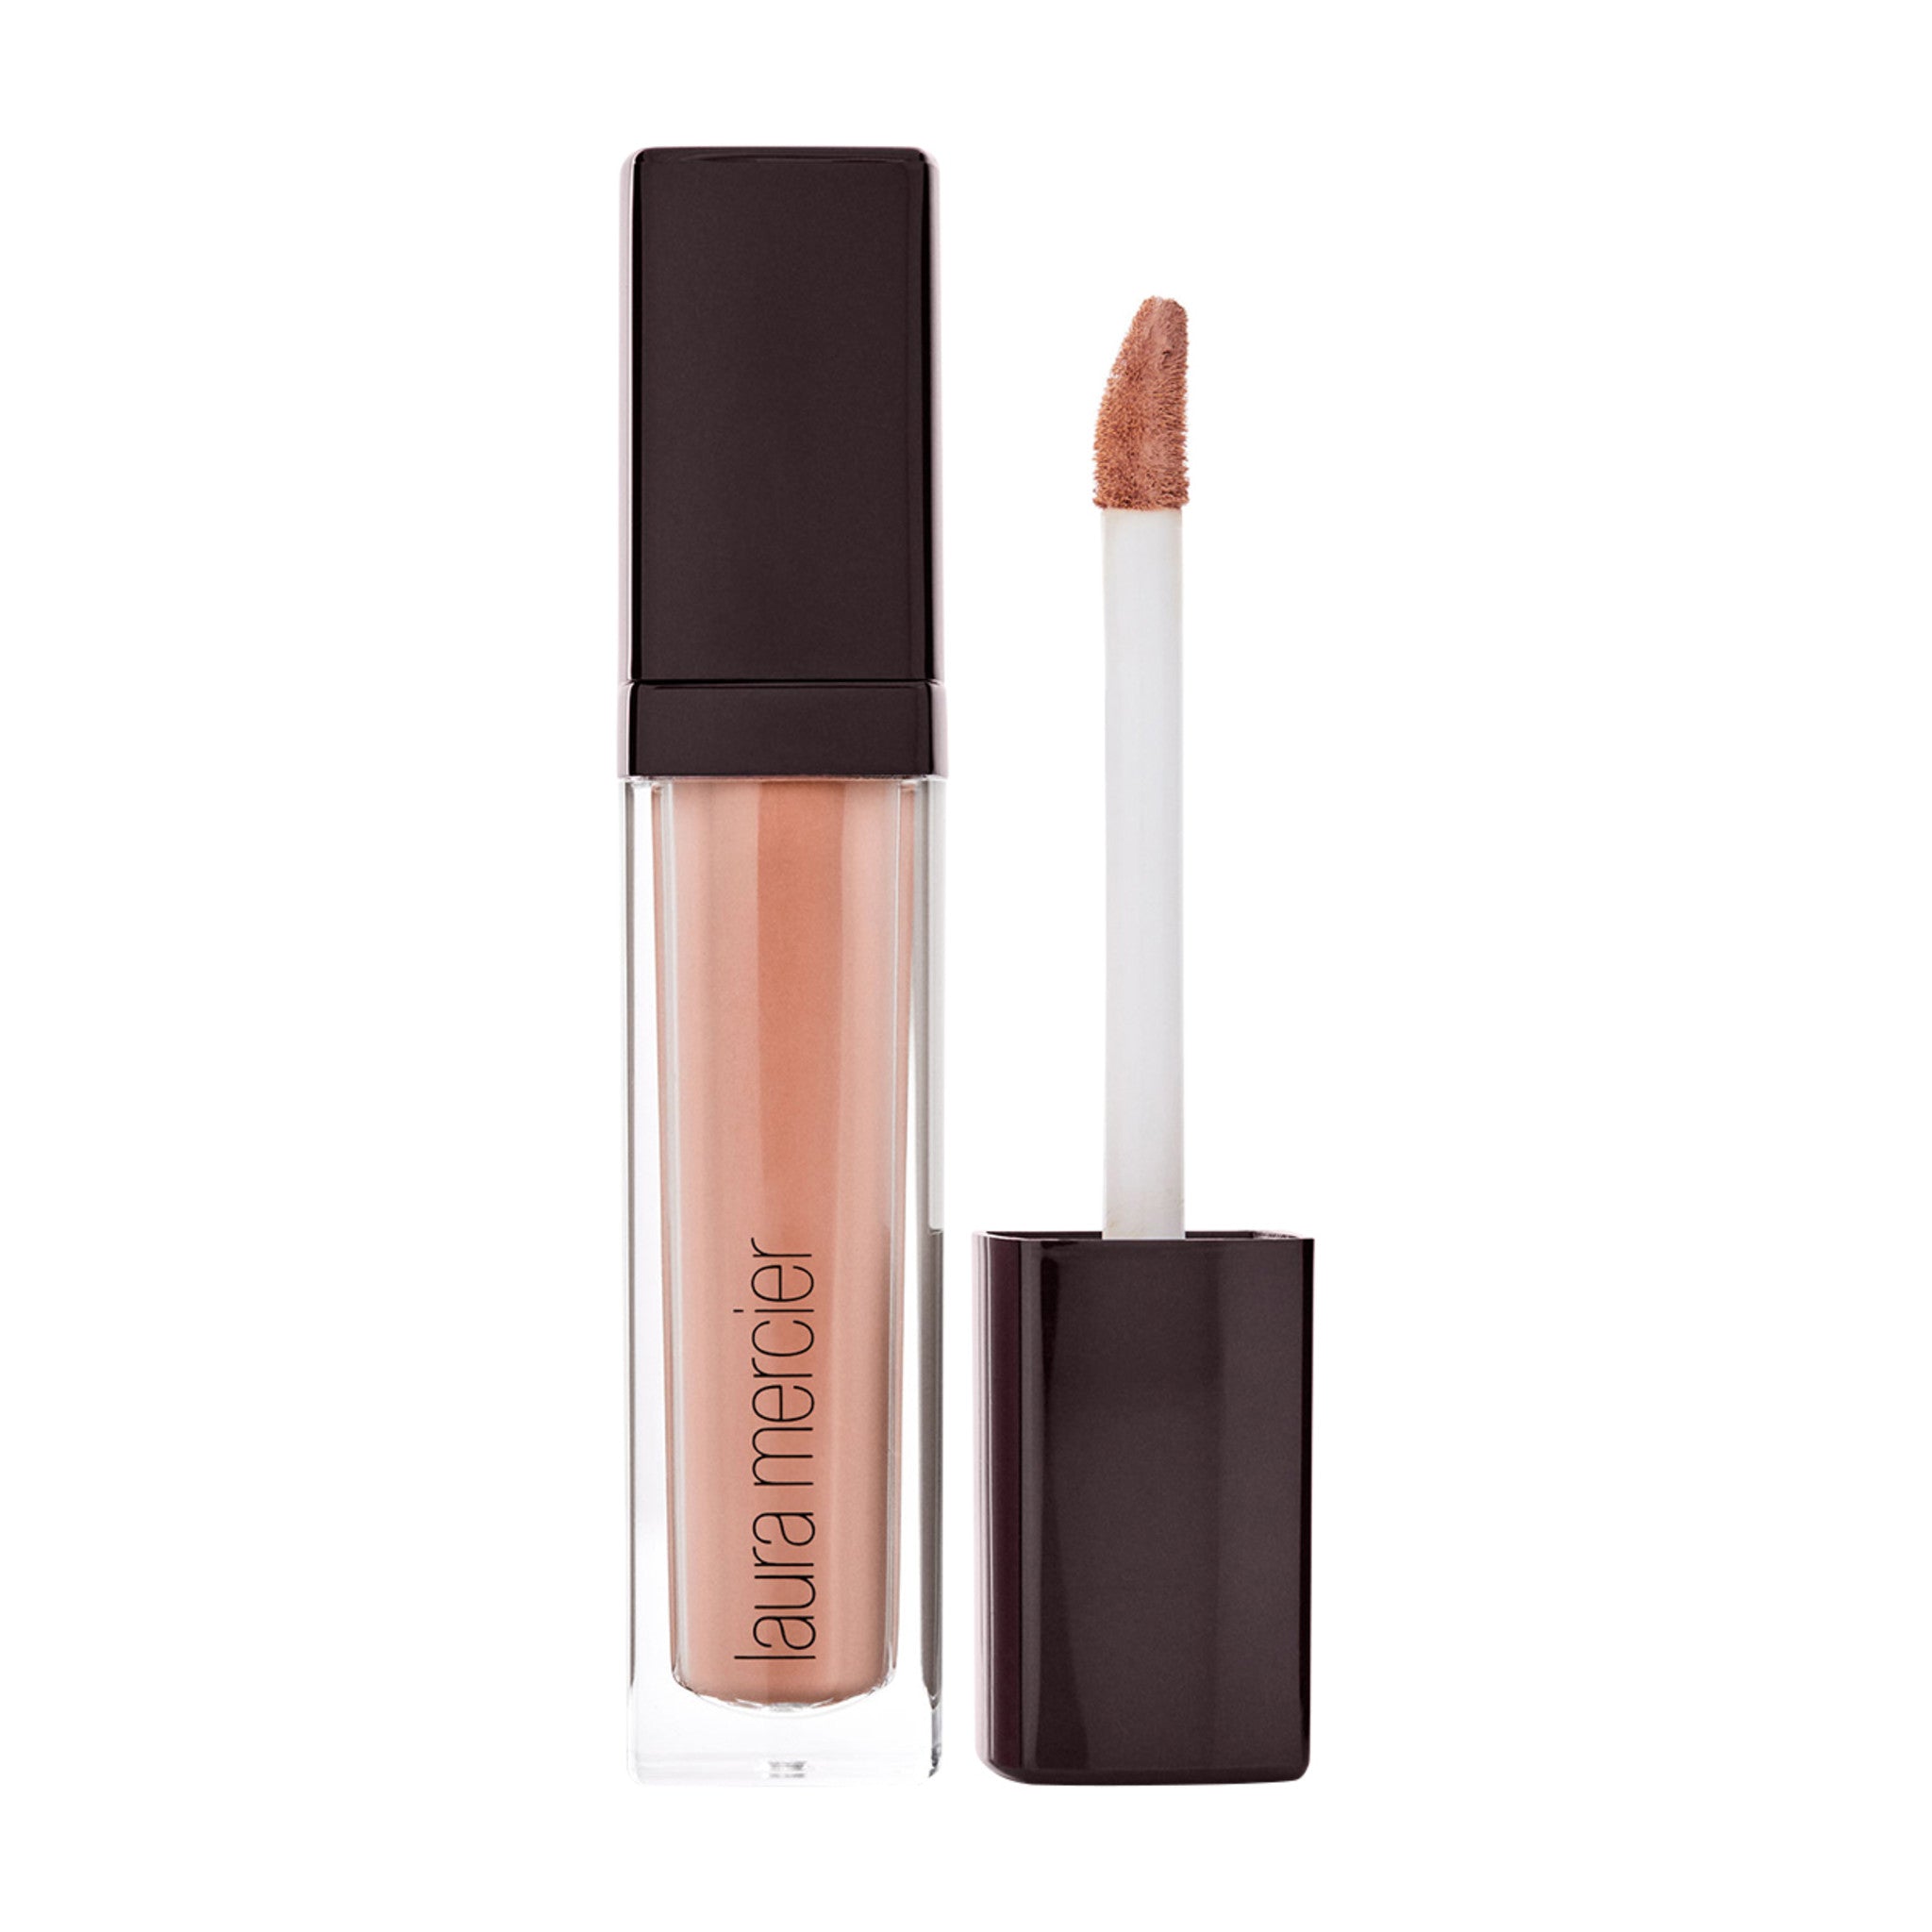 Laura Mercier Eye Basics Color/Shade variant: Buff main image. This product is in the color nude